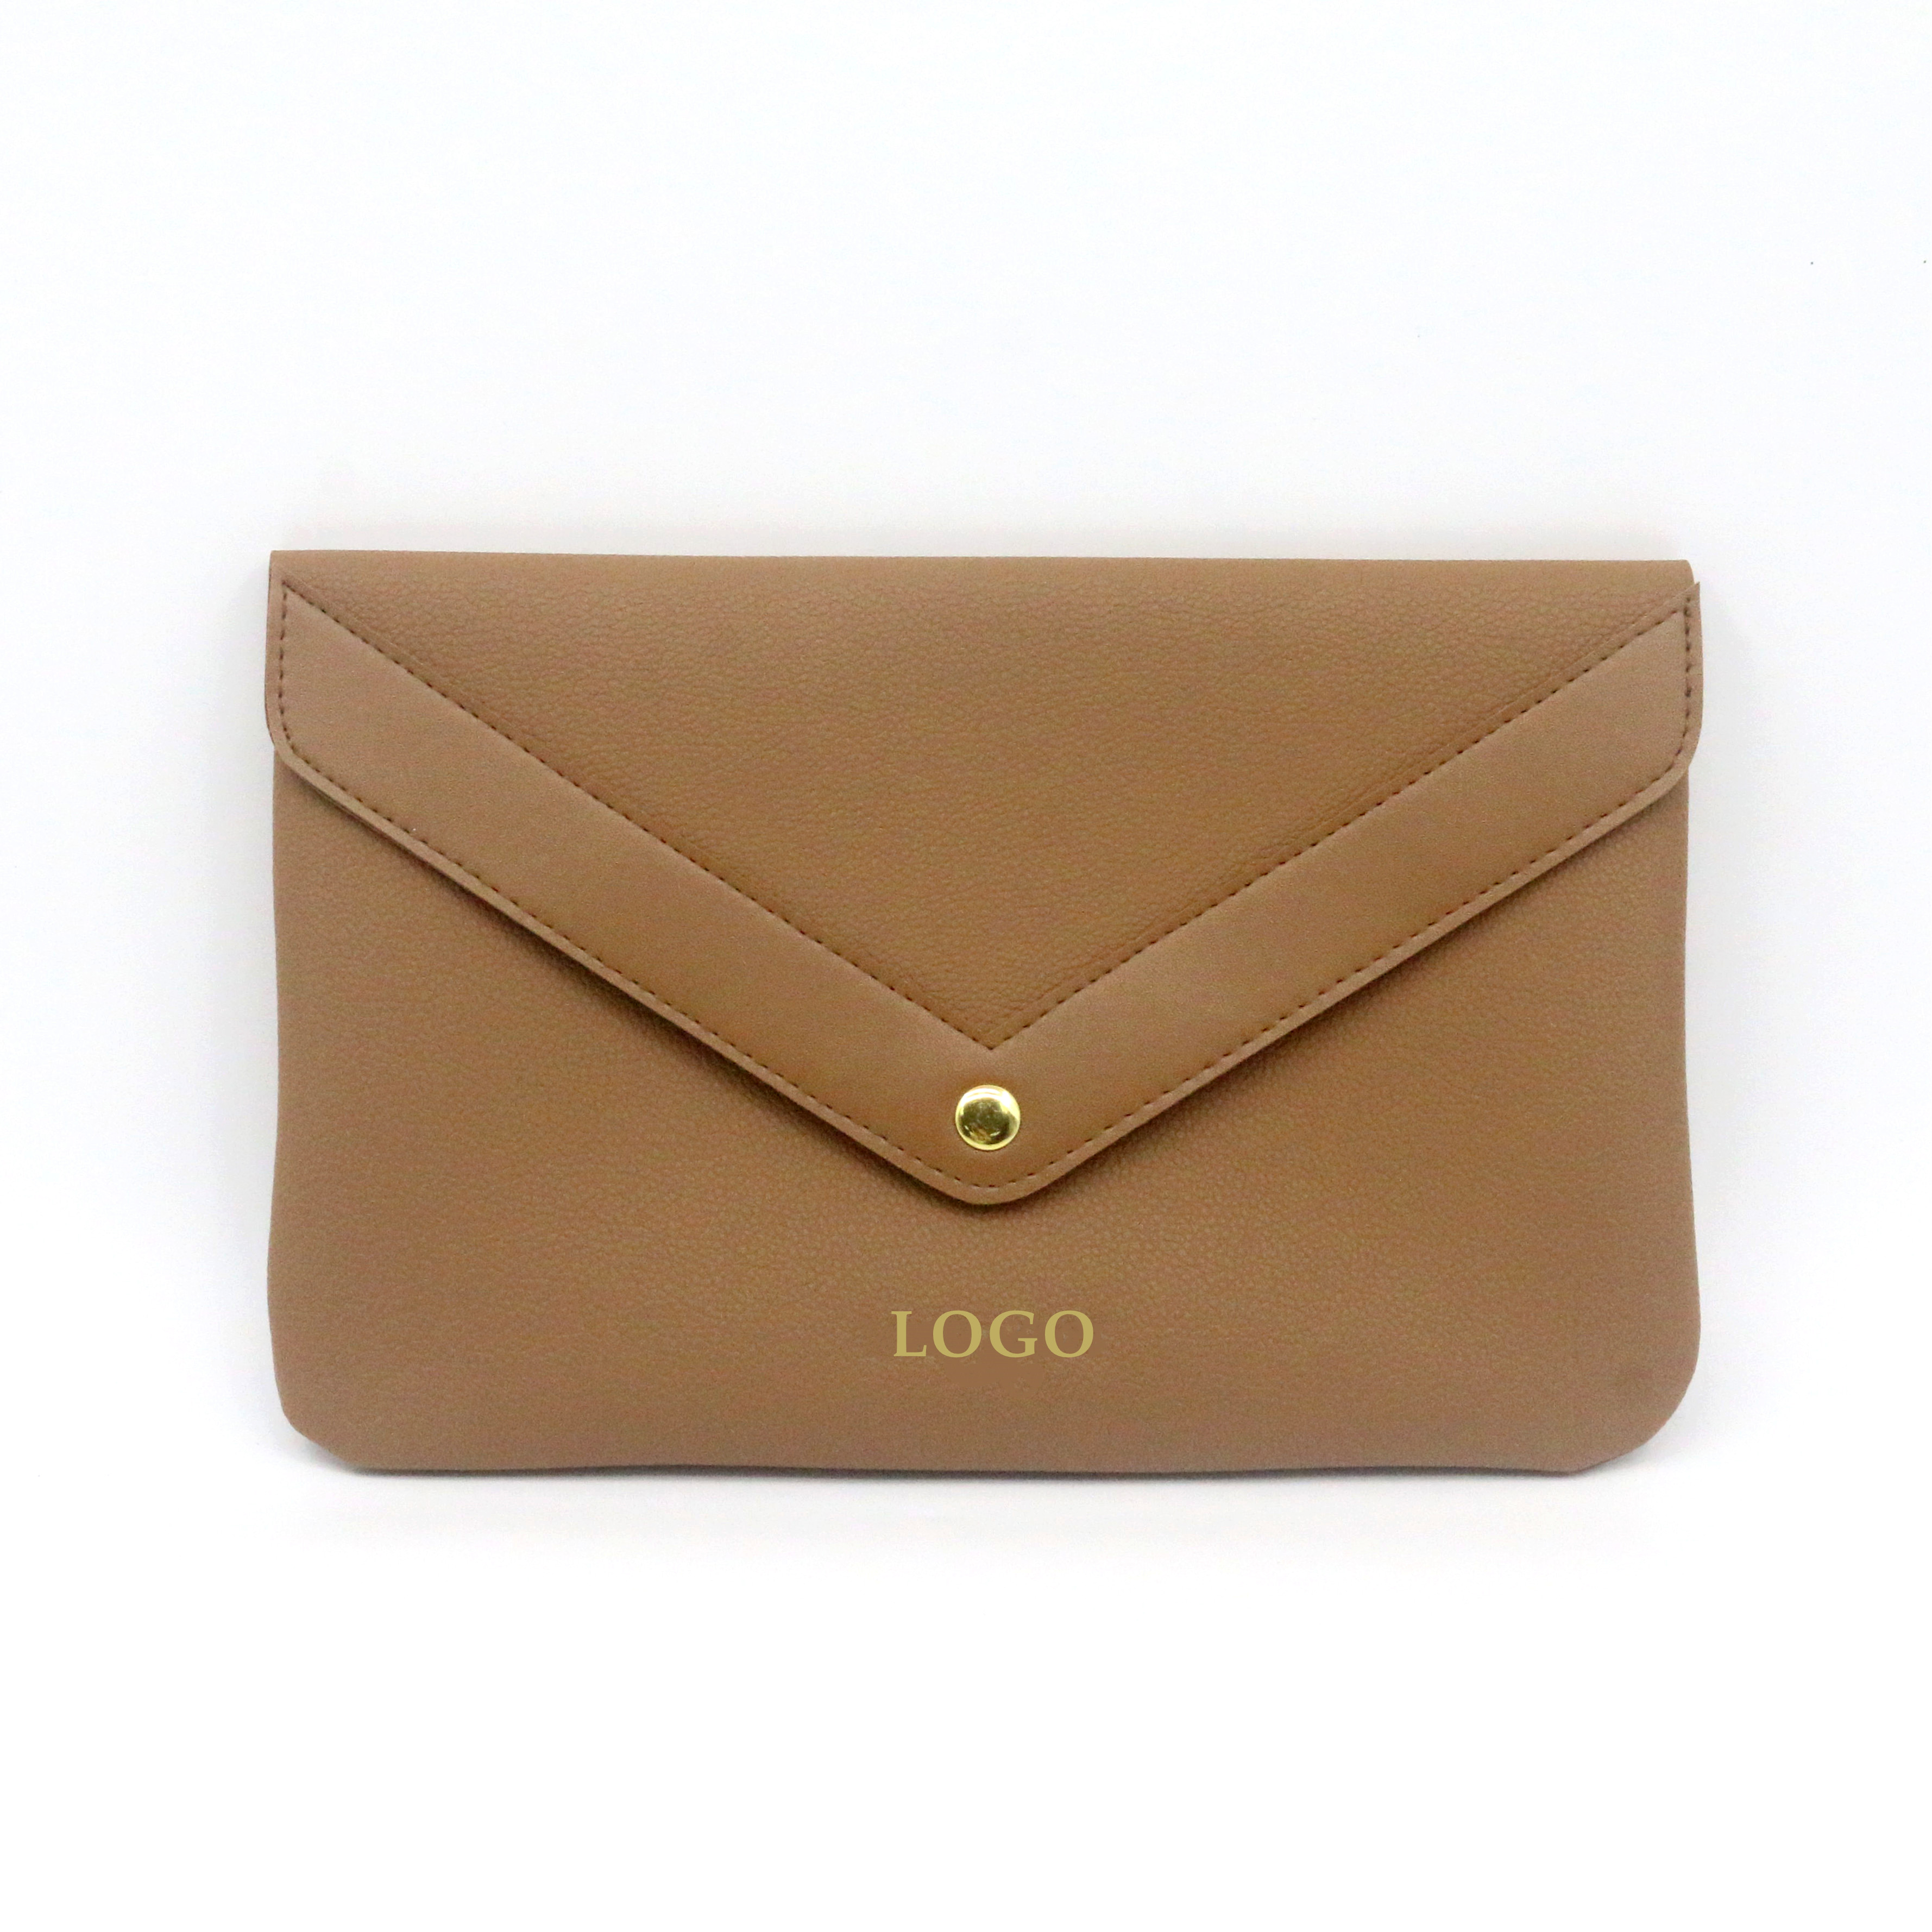 Quality Brown PU Leather Clutch Bag  Classic Envelope Shape Brown Vegan Leather Women's Clutches Daily Use Clutch Purse